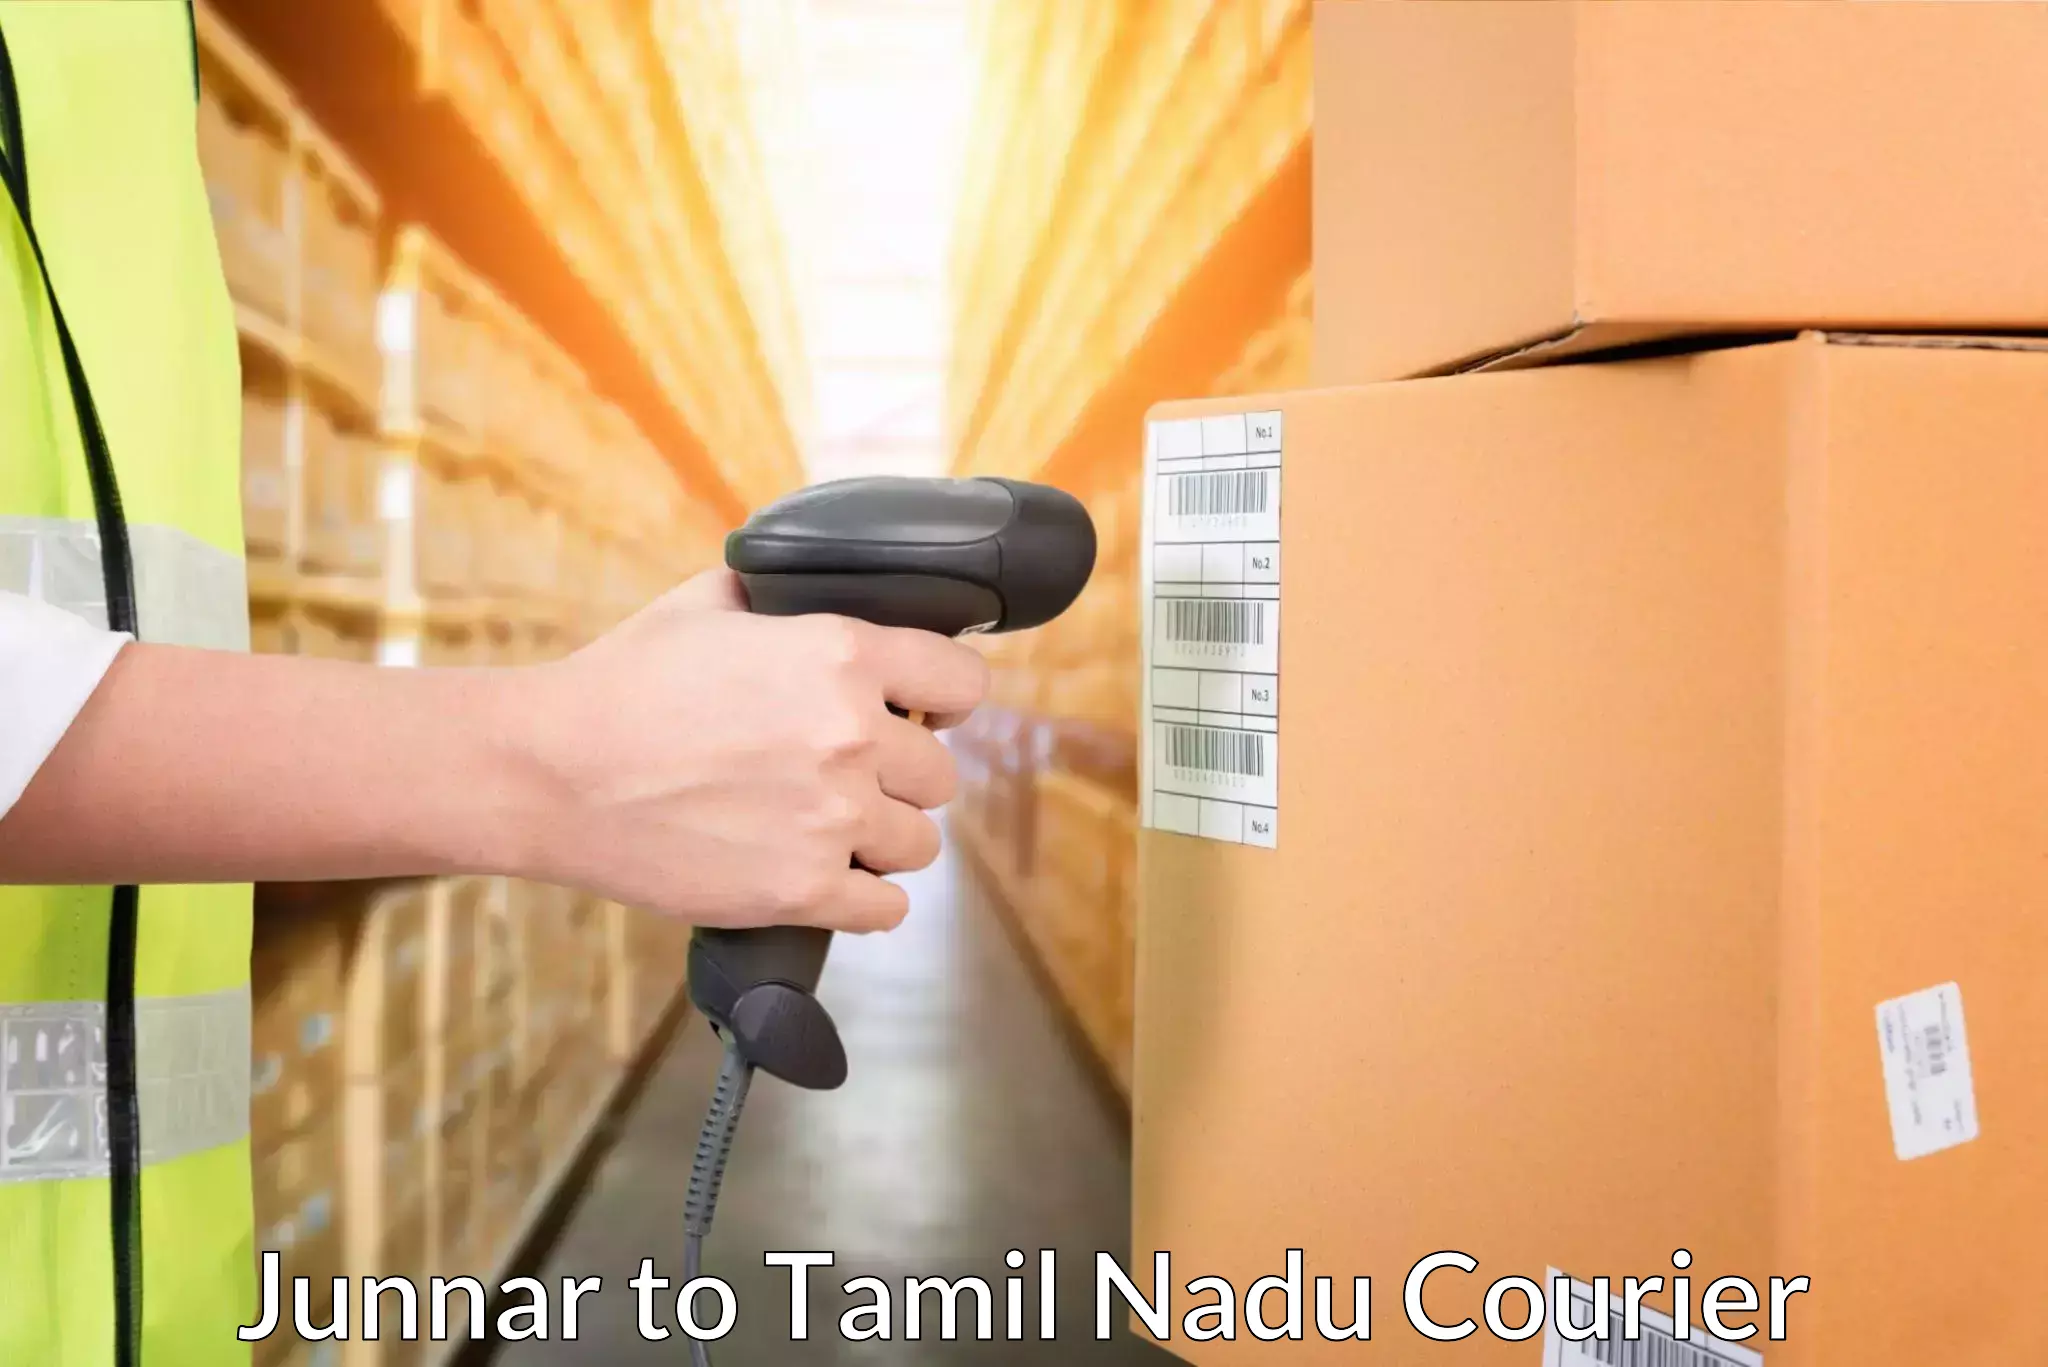 Flexible delivery scheduling Junnar to Ennore Port Chennai